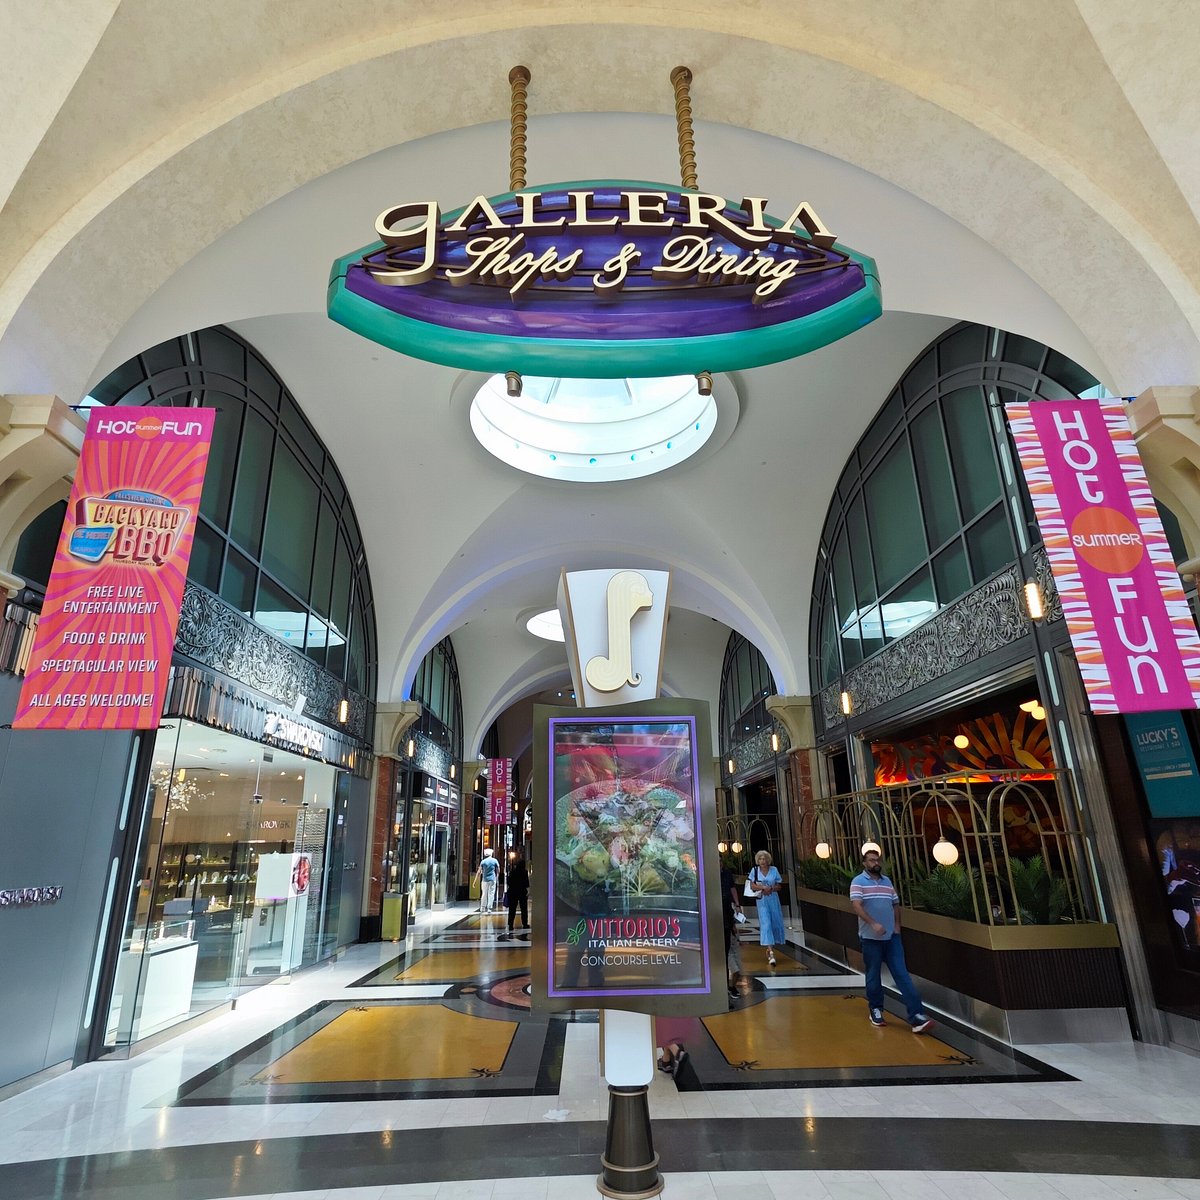 Dining & Restaurants at The Galleria - A Shopping Center In